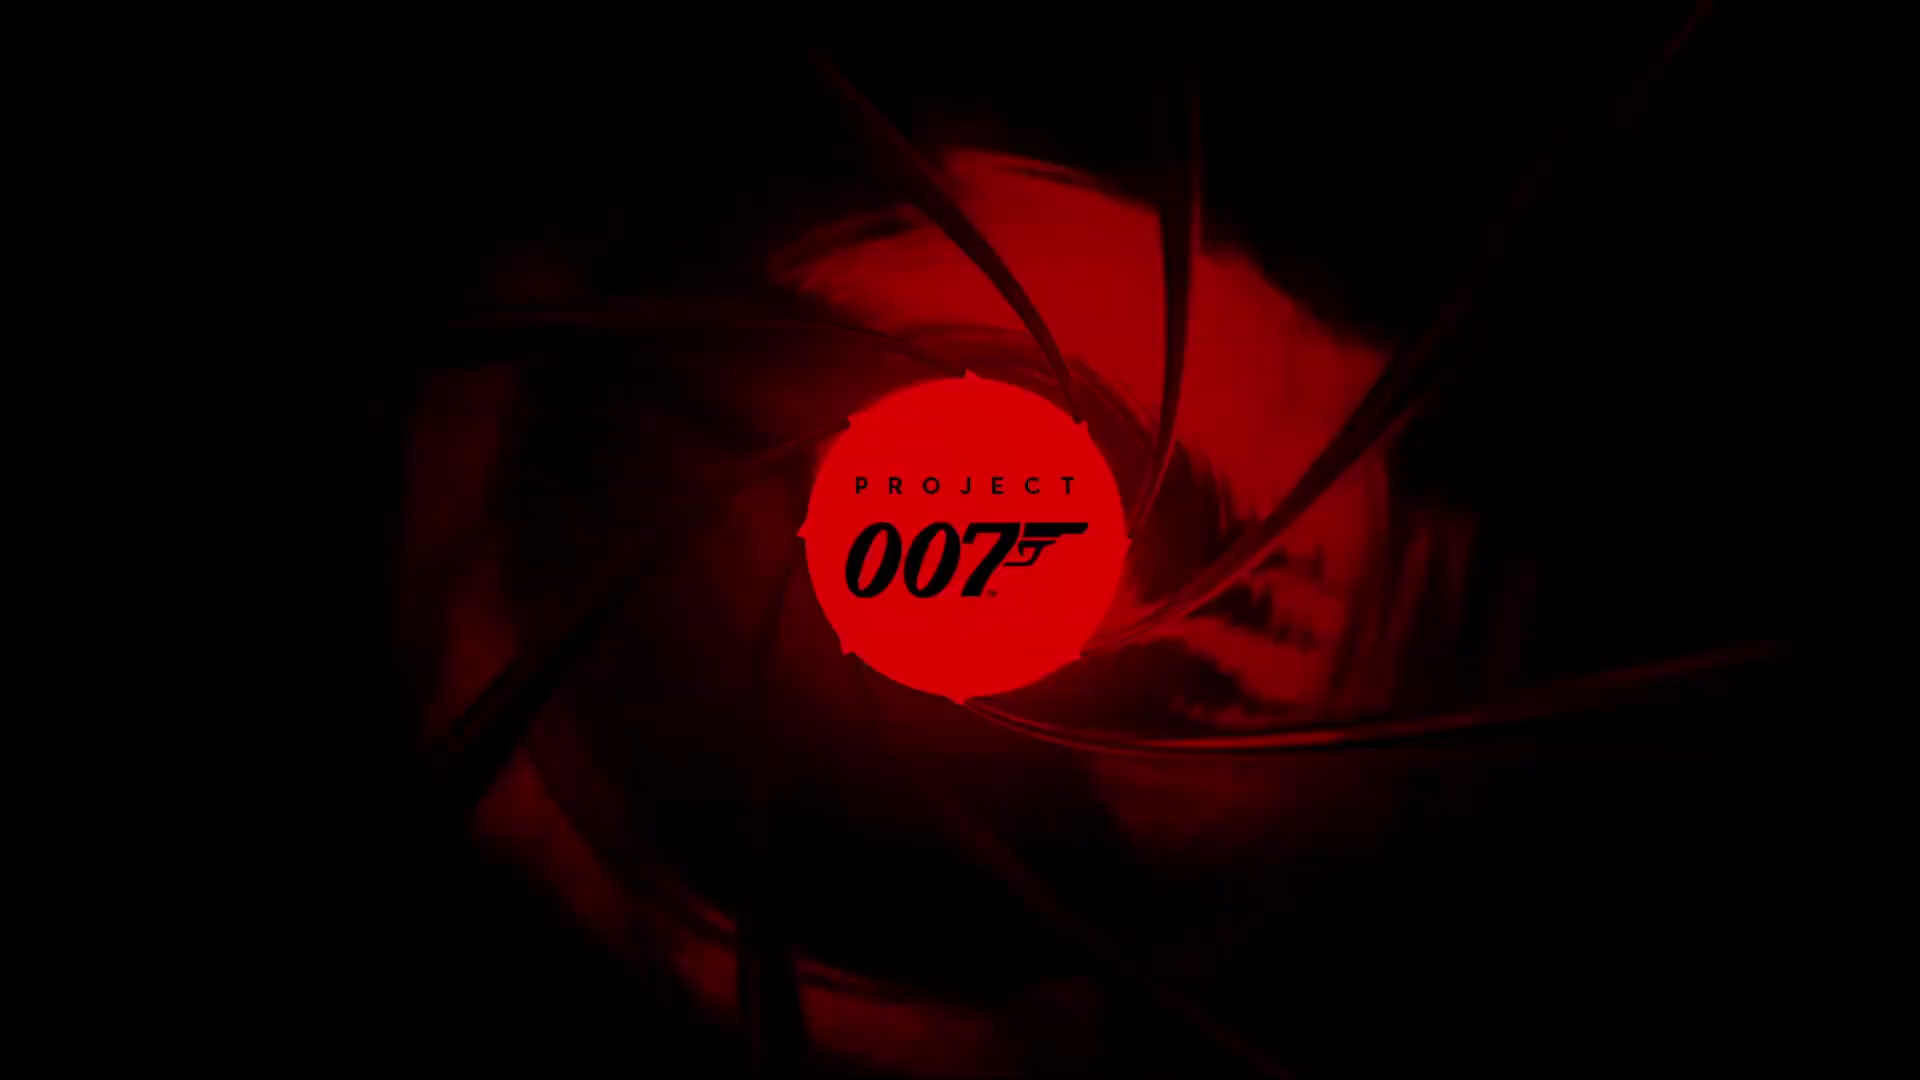 Project 007.